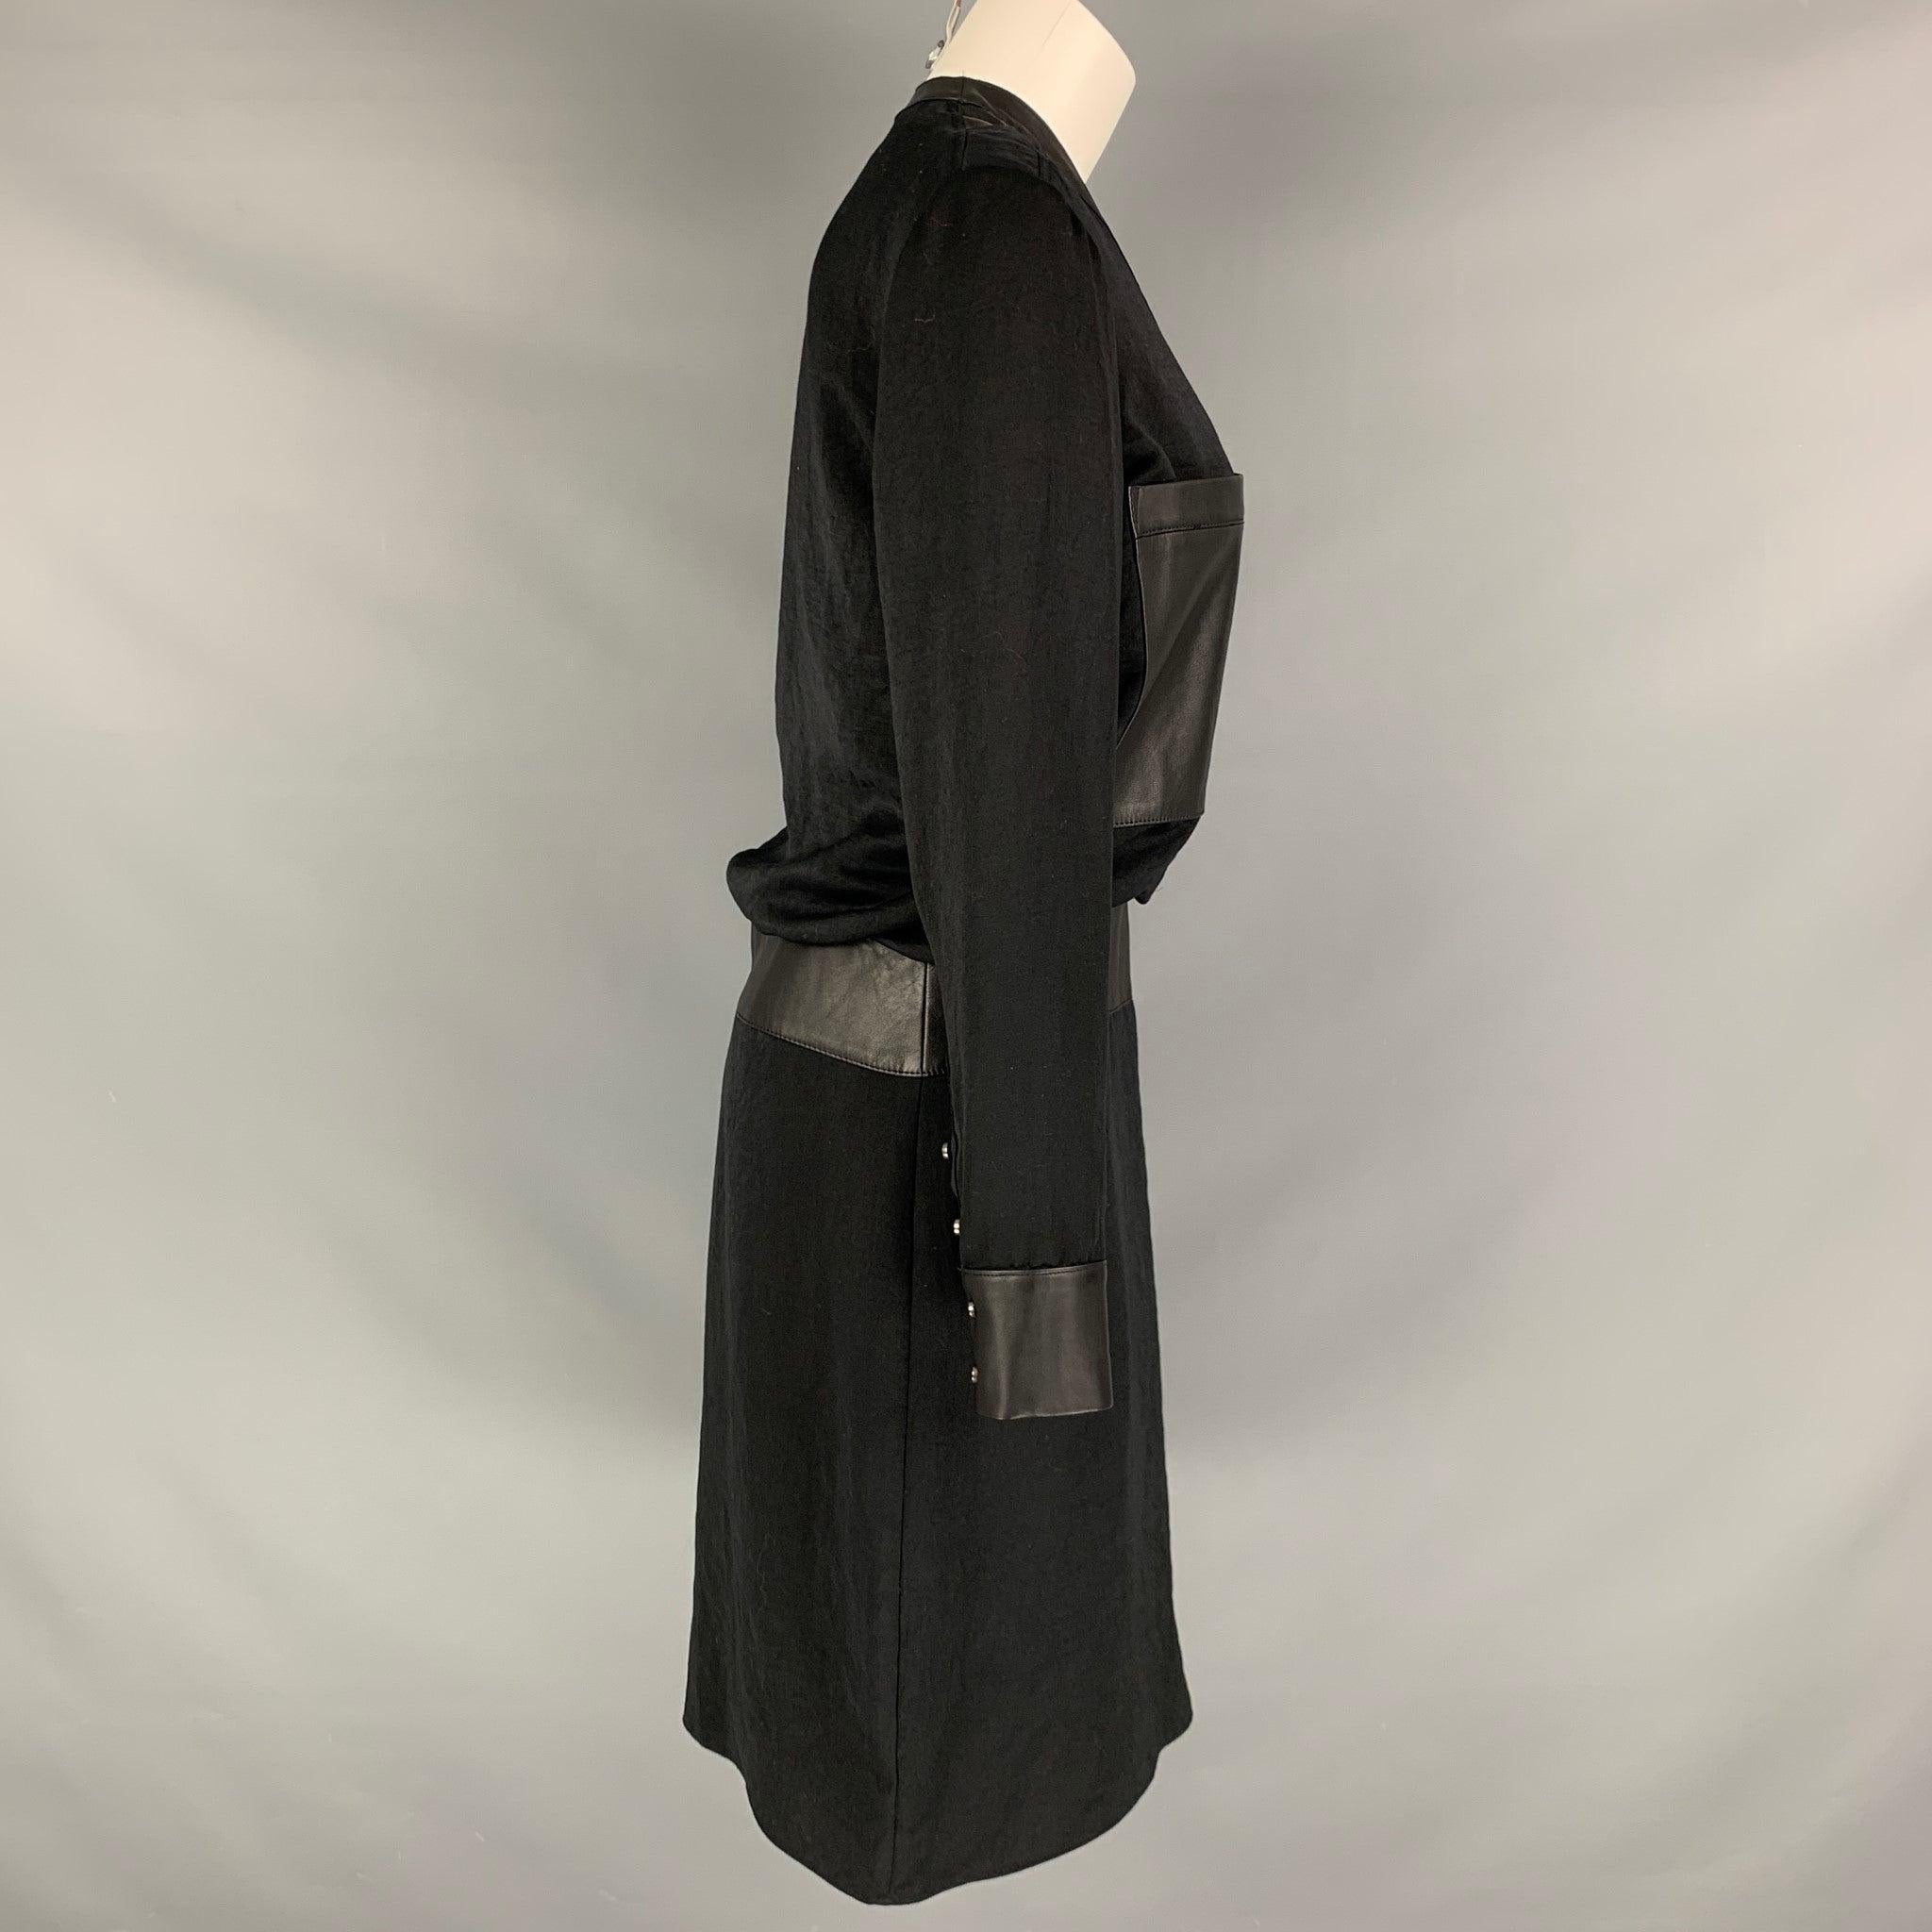 HELMUT LANG long sleeve dress comes in a black polyester woven material featuring a black leather lamb skin details, patch pockets, button down closure, and cuff sleeves. Made in USA.Excellent Pre-Owned Condition. Minor signs of wear. 

Marked:  6